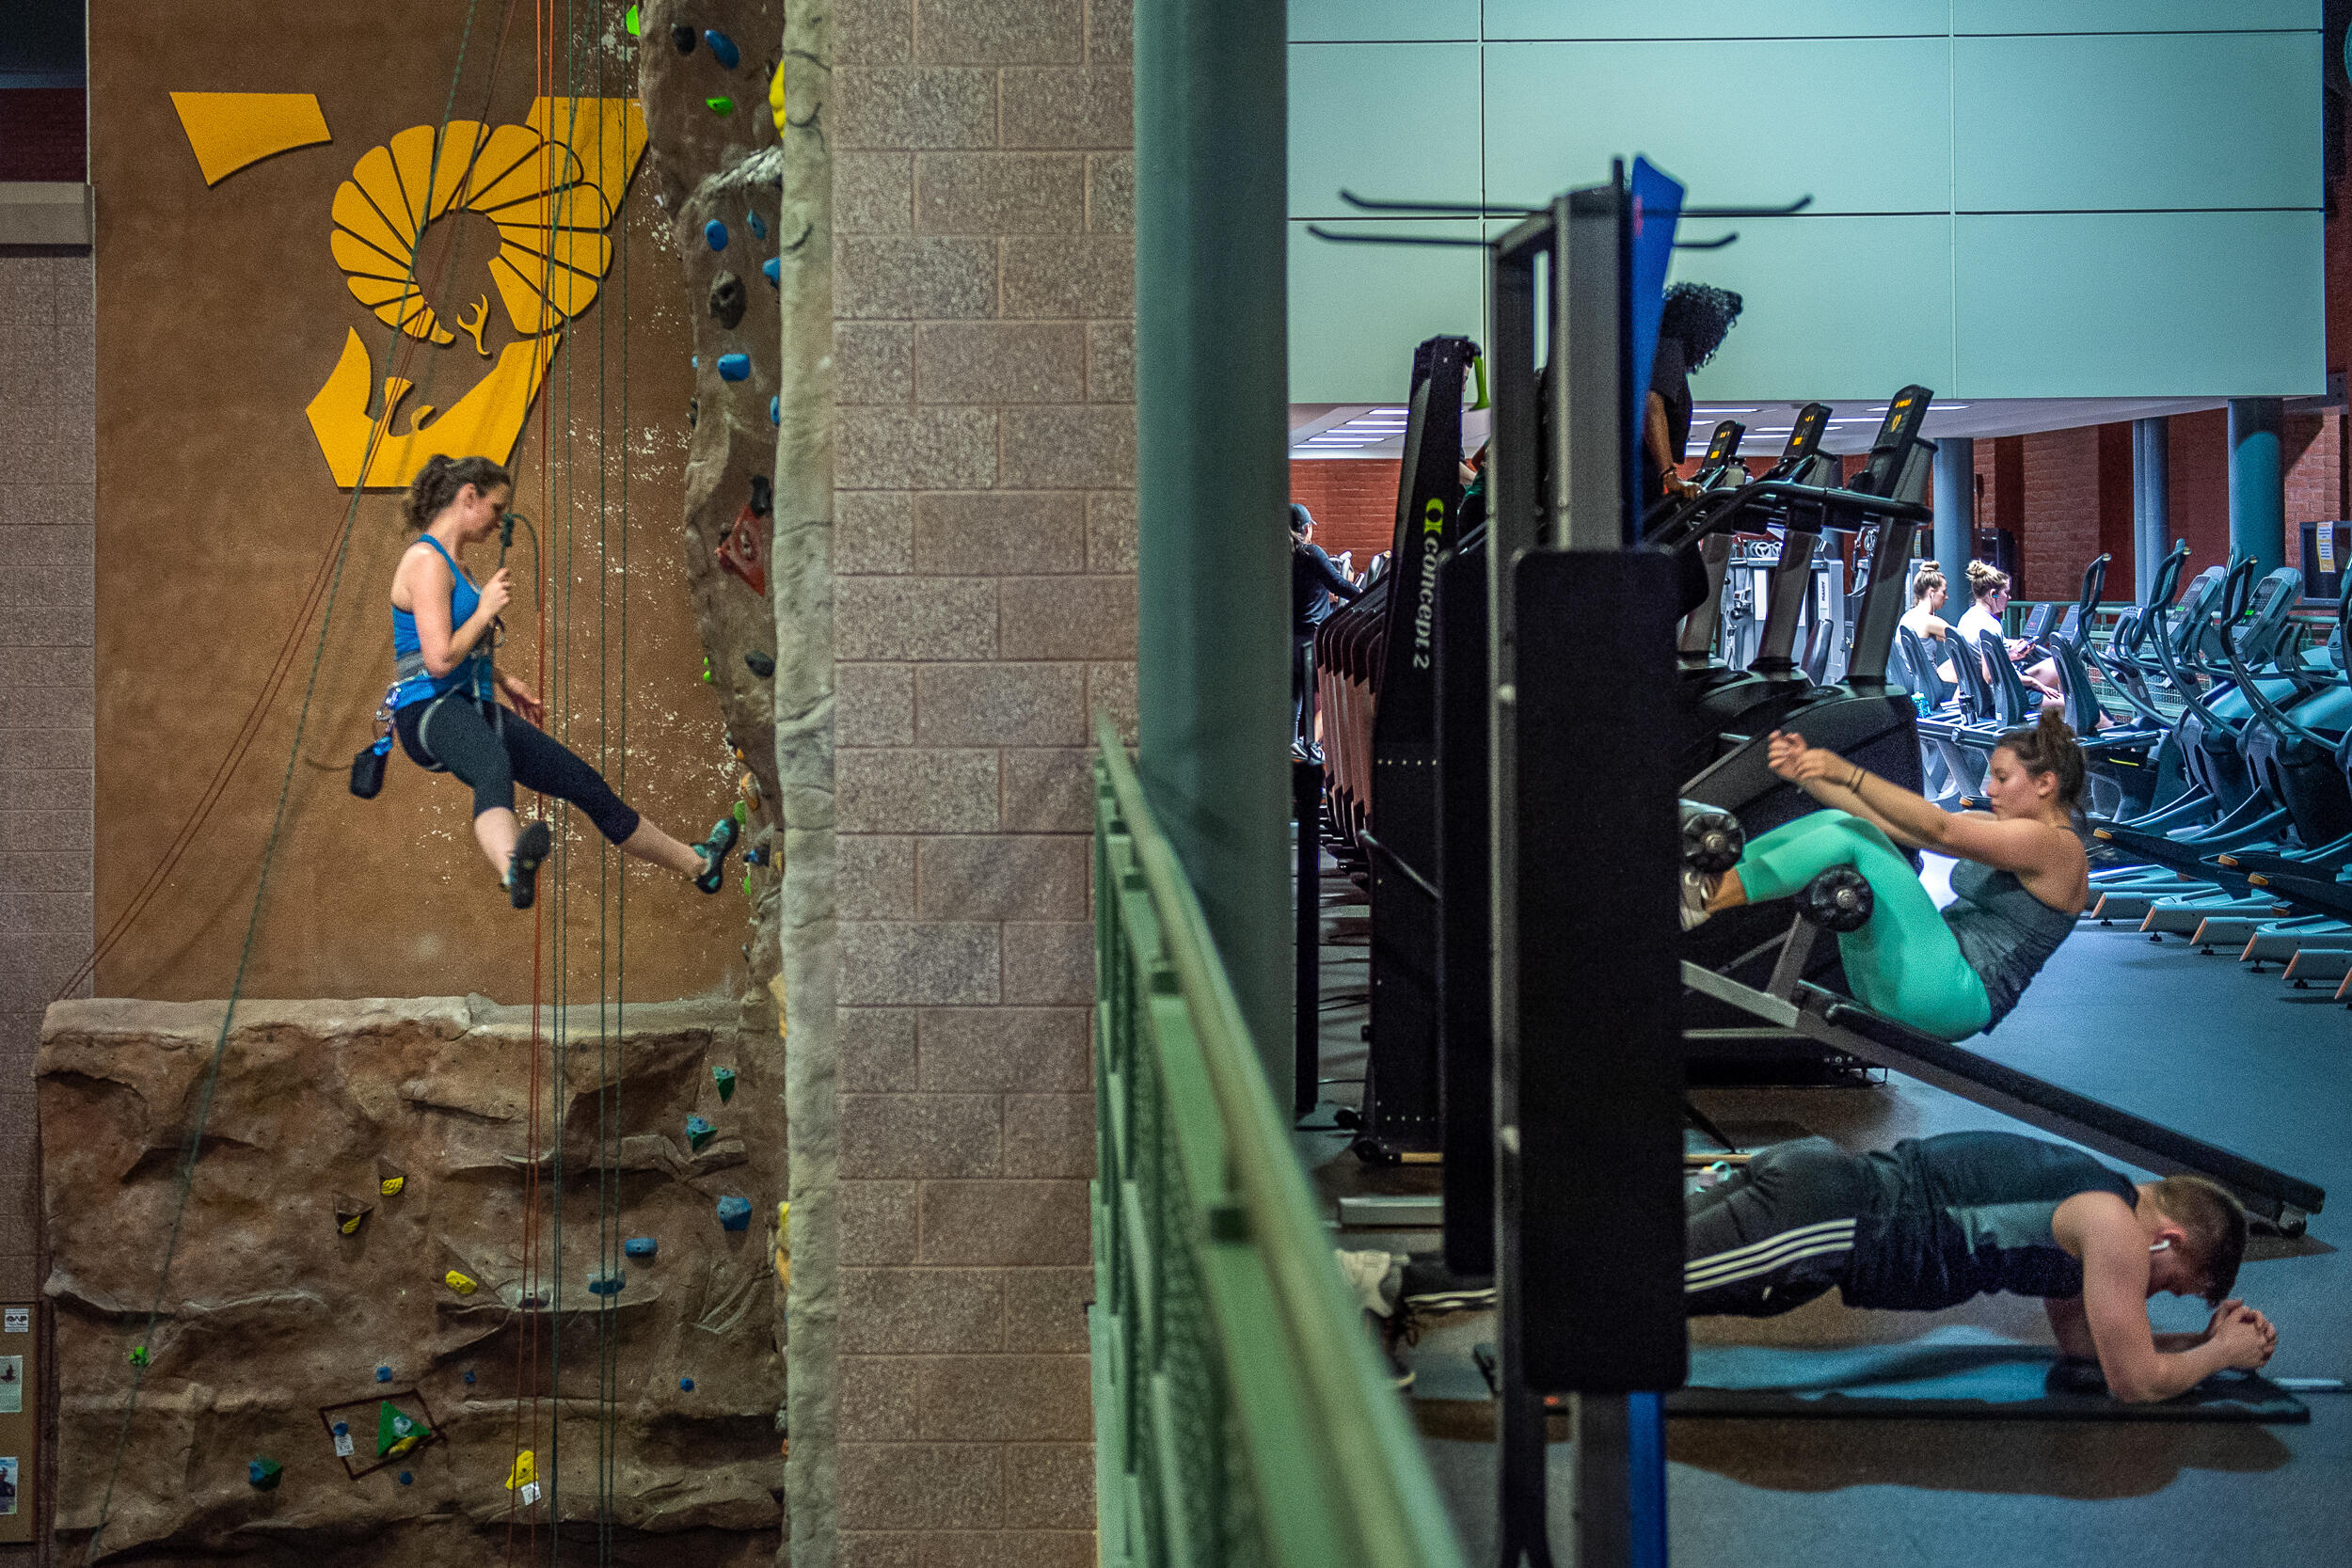 Students work out on a row of workout equipment on the other side of a rock climbing wall where a student climbs at Cary Street Gym.